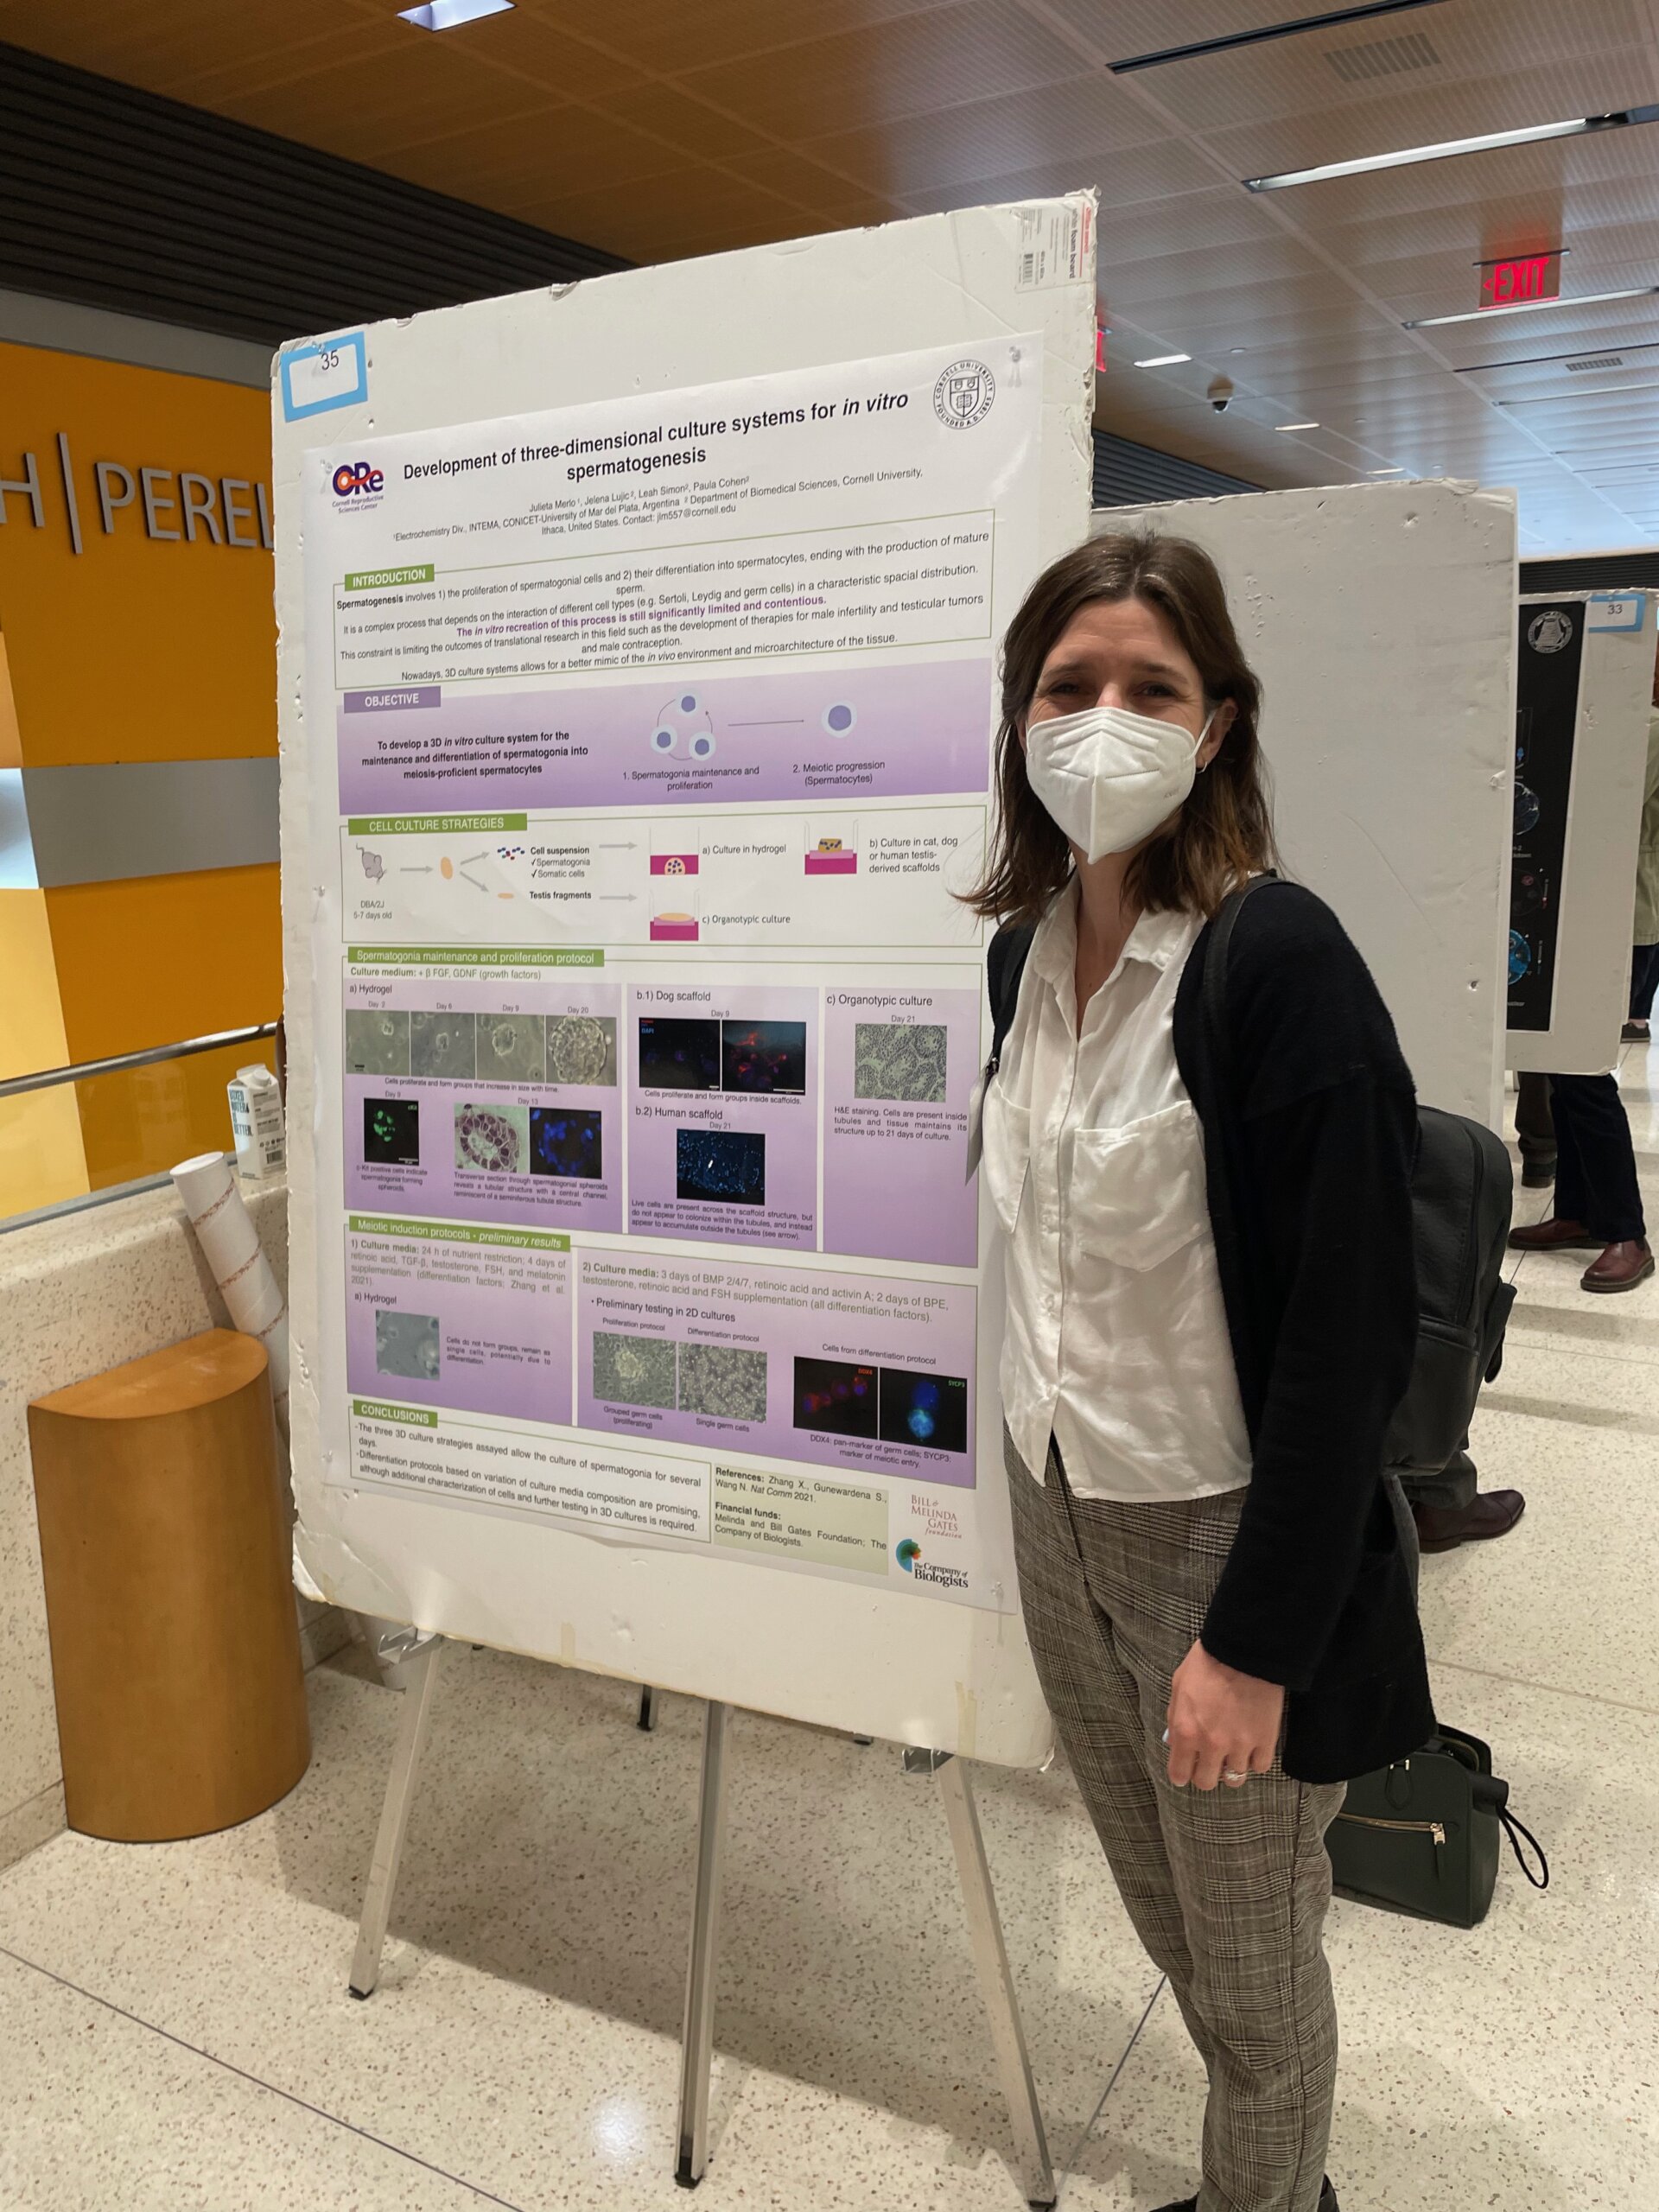 Female scientist standing in front of “Development of three-dimensional culture systems for in vitro spermatogenesis” poster